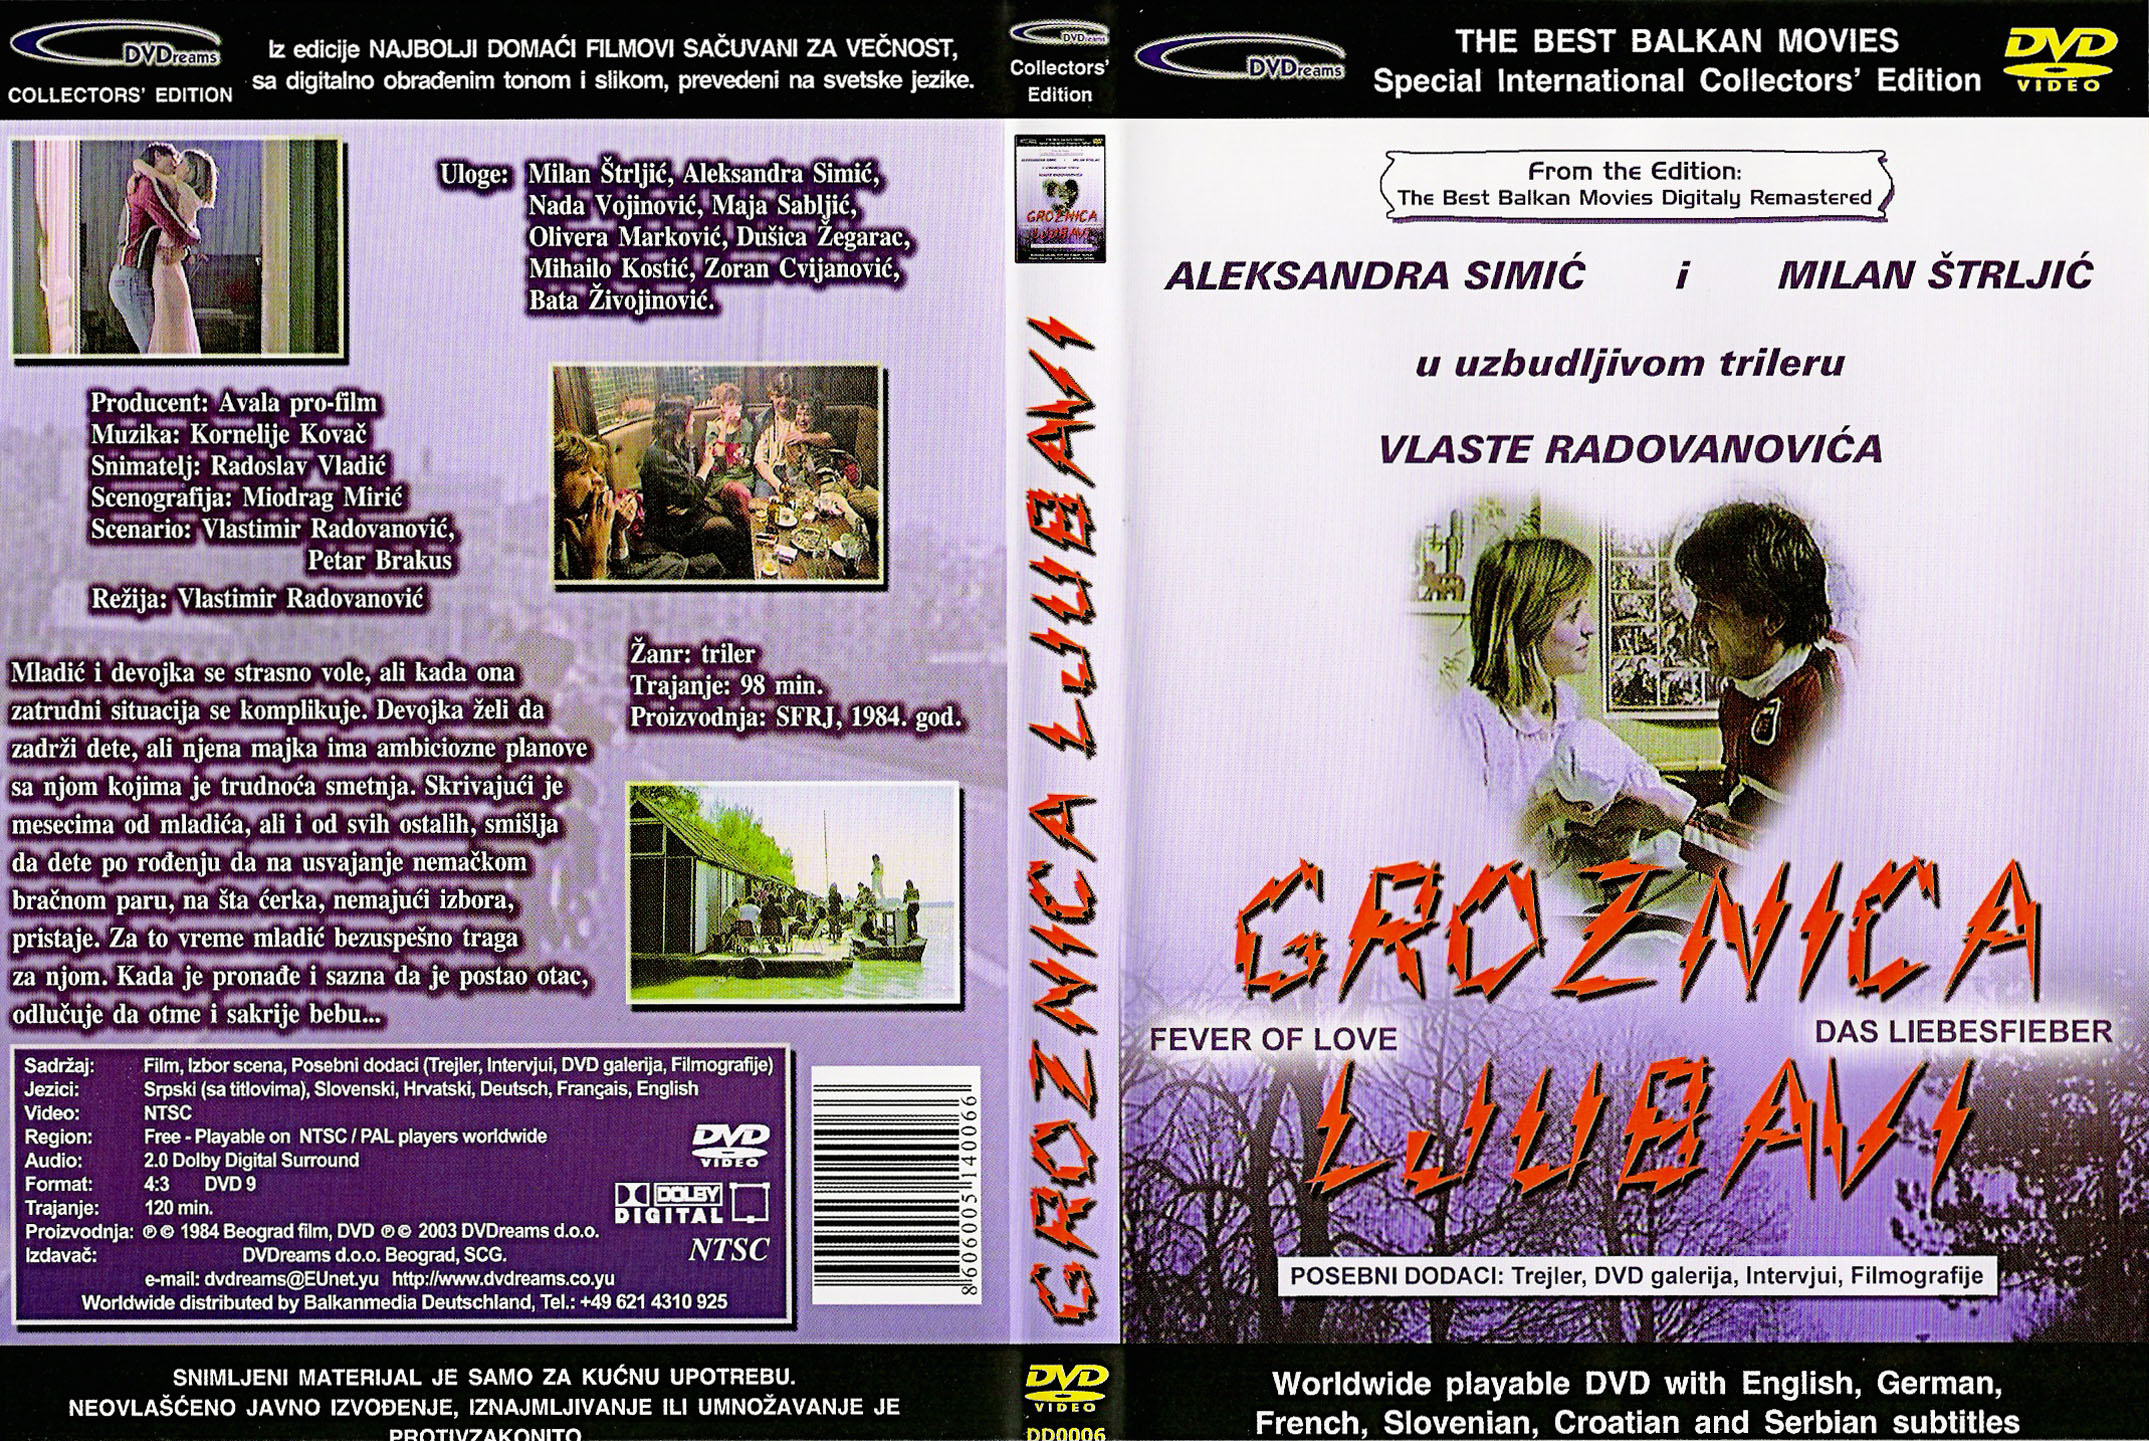 Click to view full size image -  DVD Cover - G - groznica_ljubavi_dvd - groznica_ljubavi_dvd.jpg